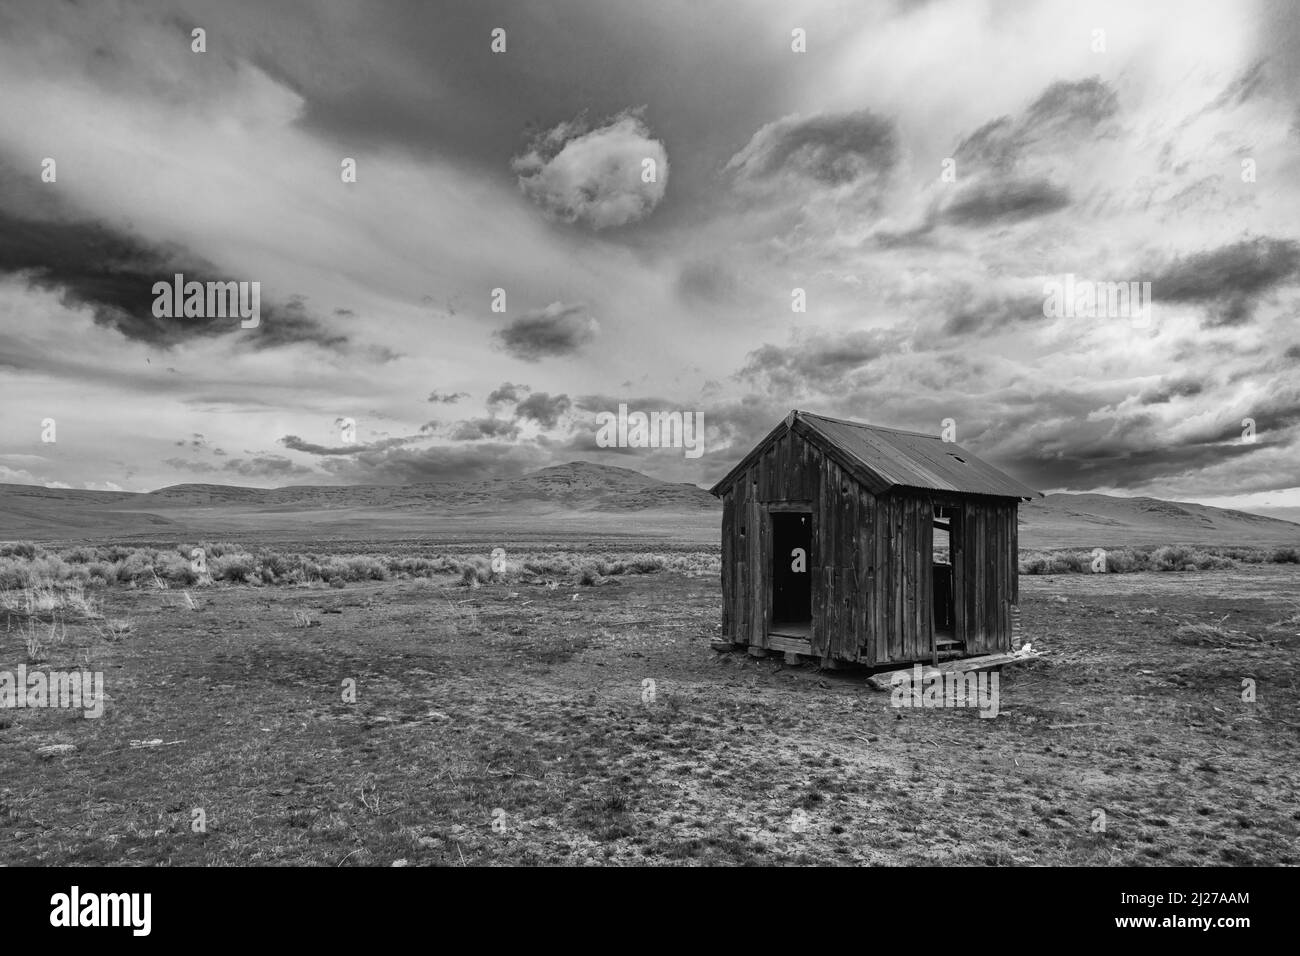 Small abandoned shack in the desert (monochrome).  Photographed in the high desert of Lassen County, California, USA. Stock Photo